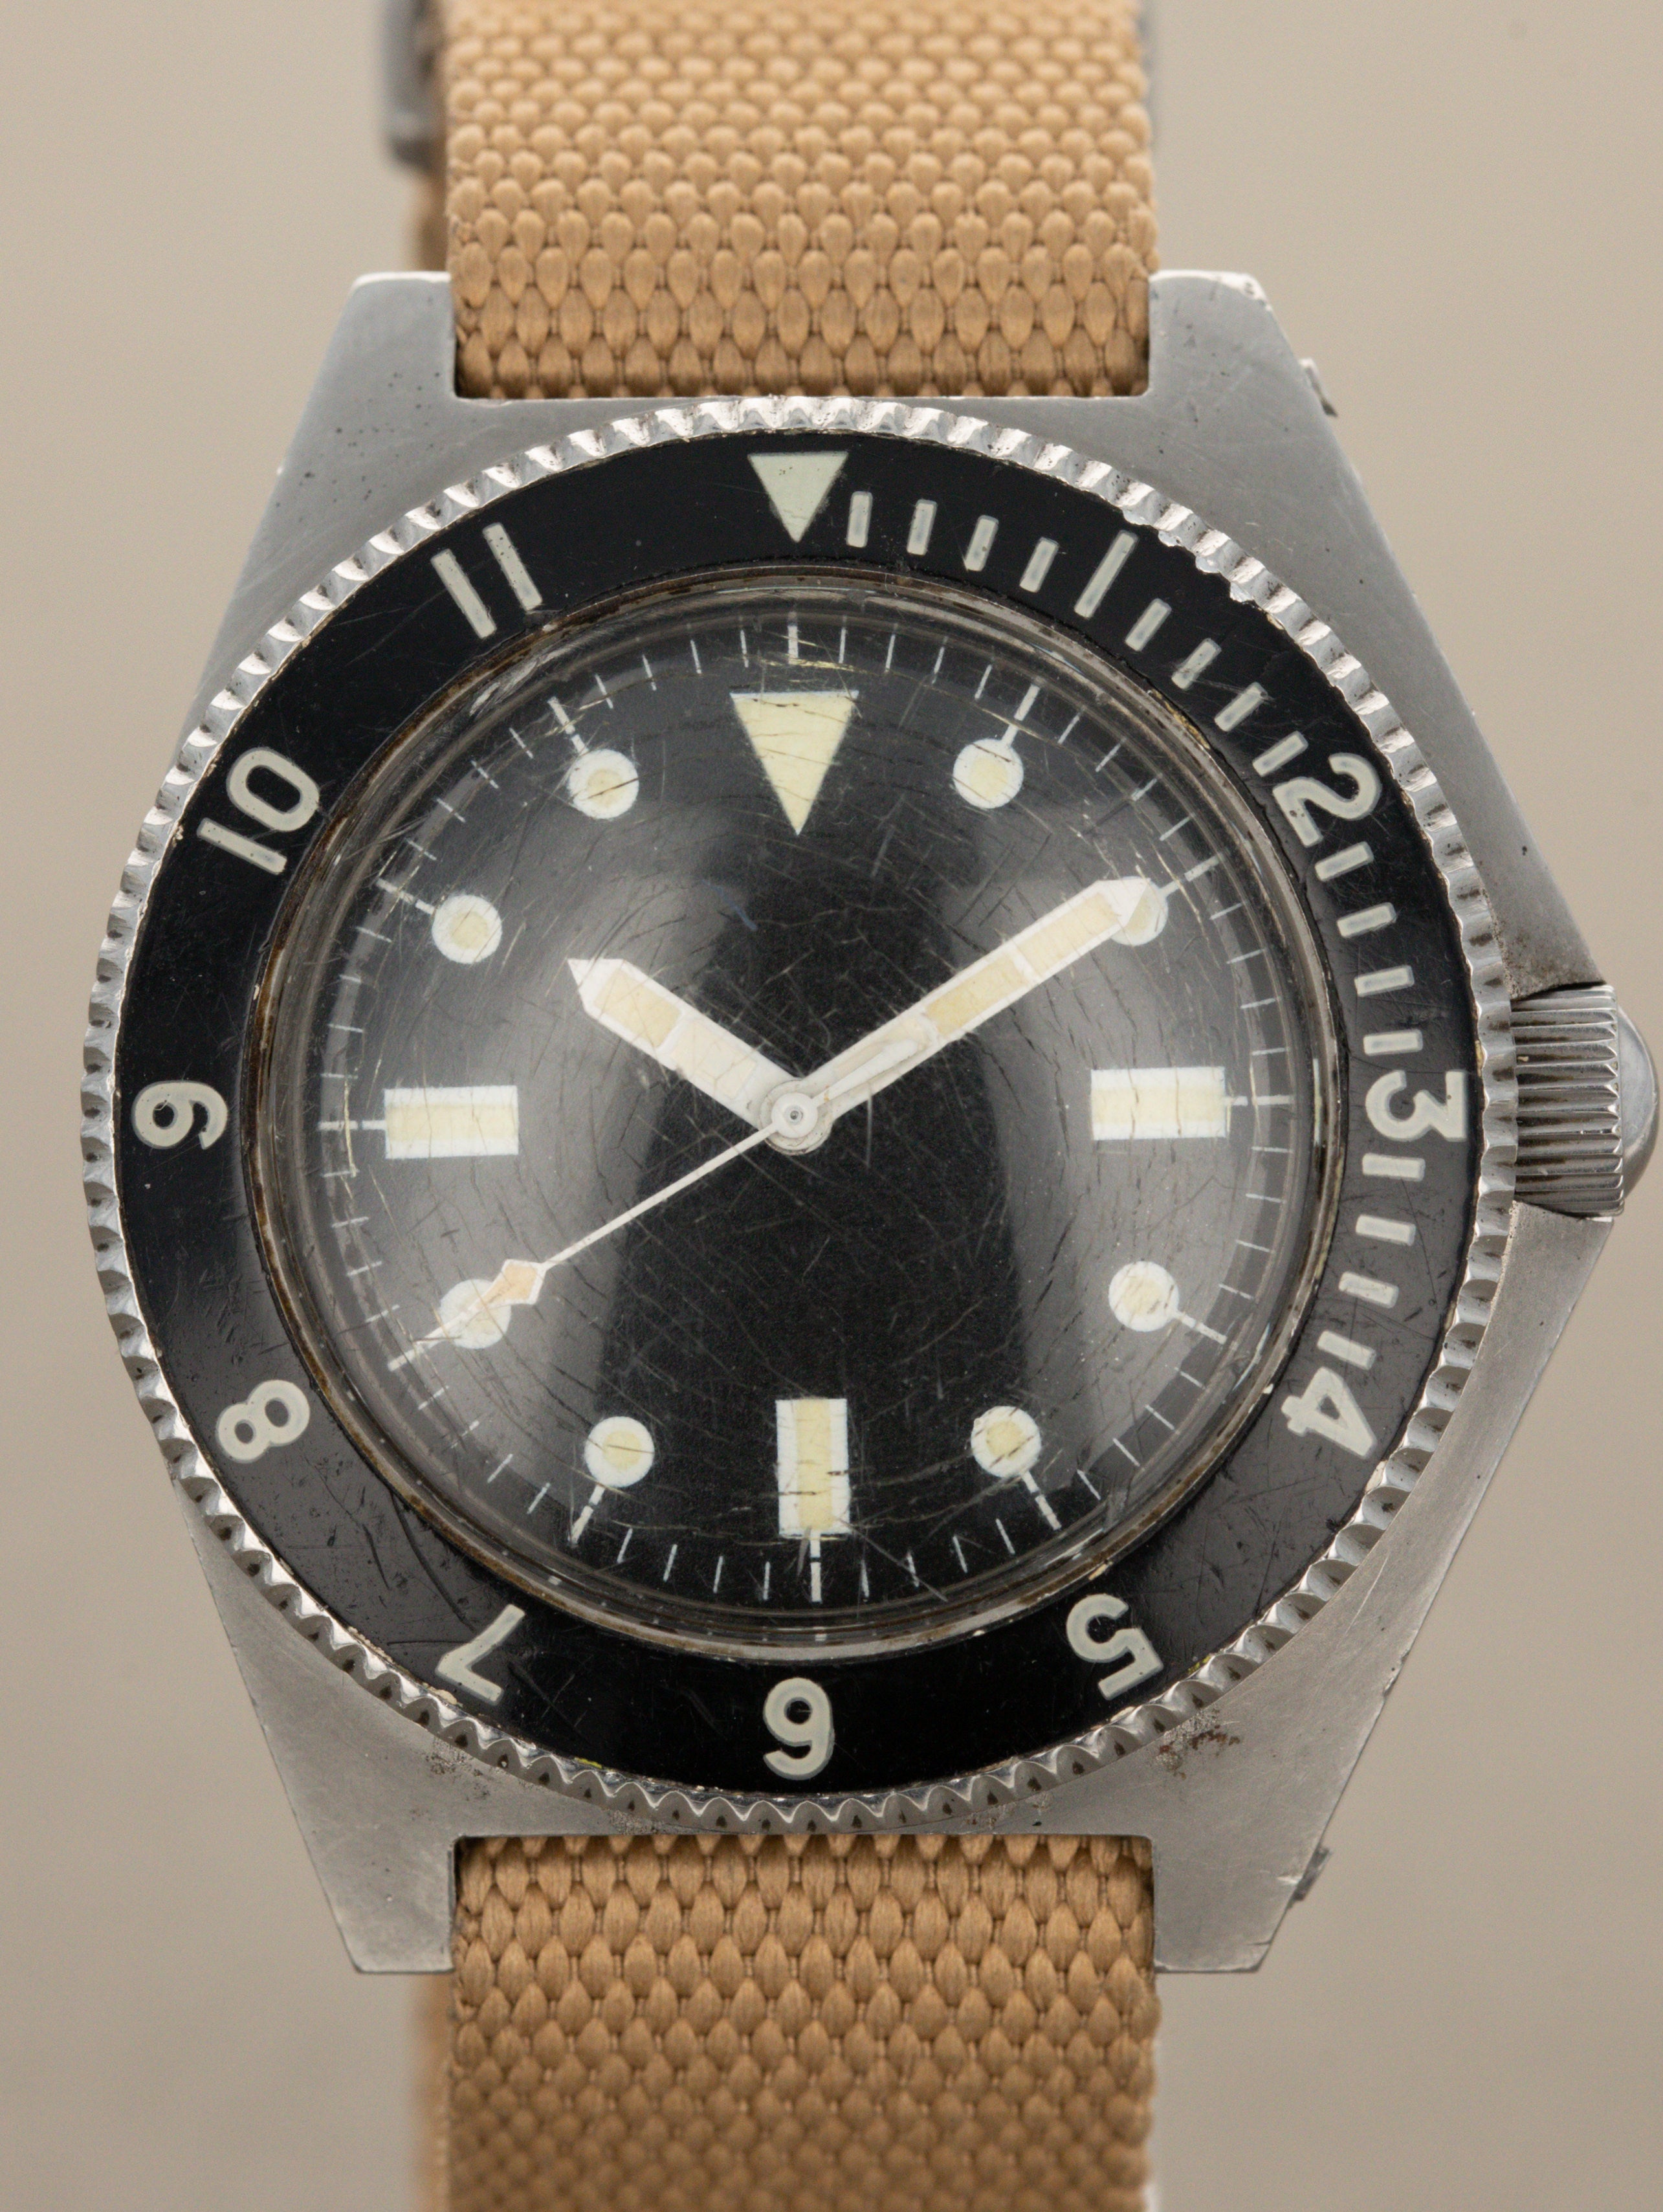 Benrus Type I - 'Sterile' Dial Military Issued